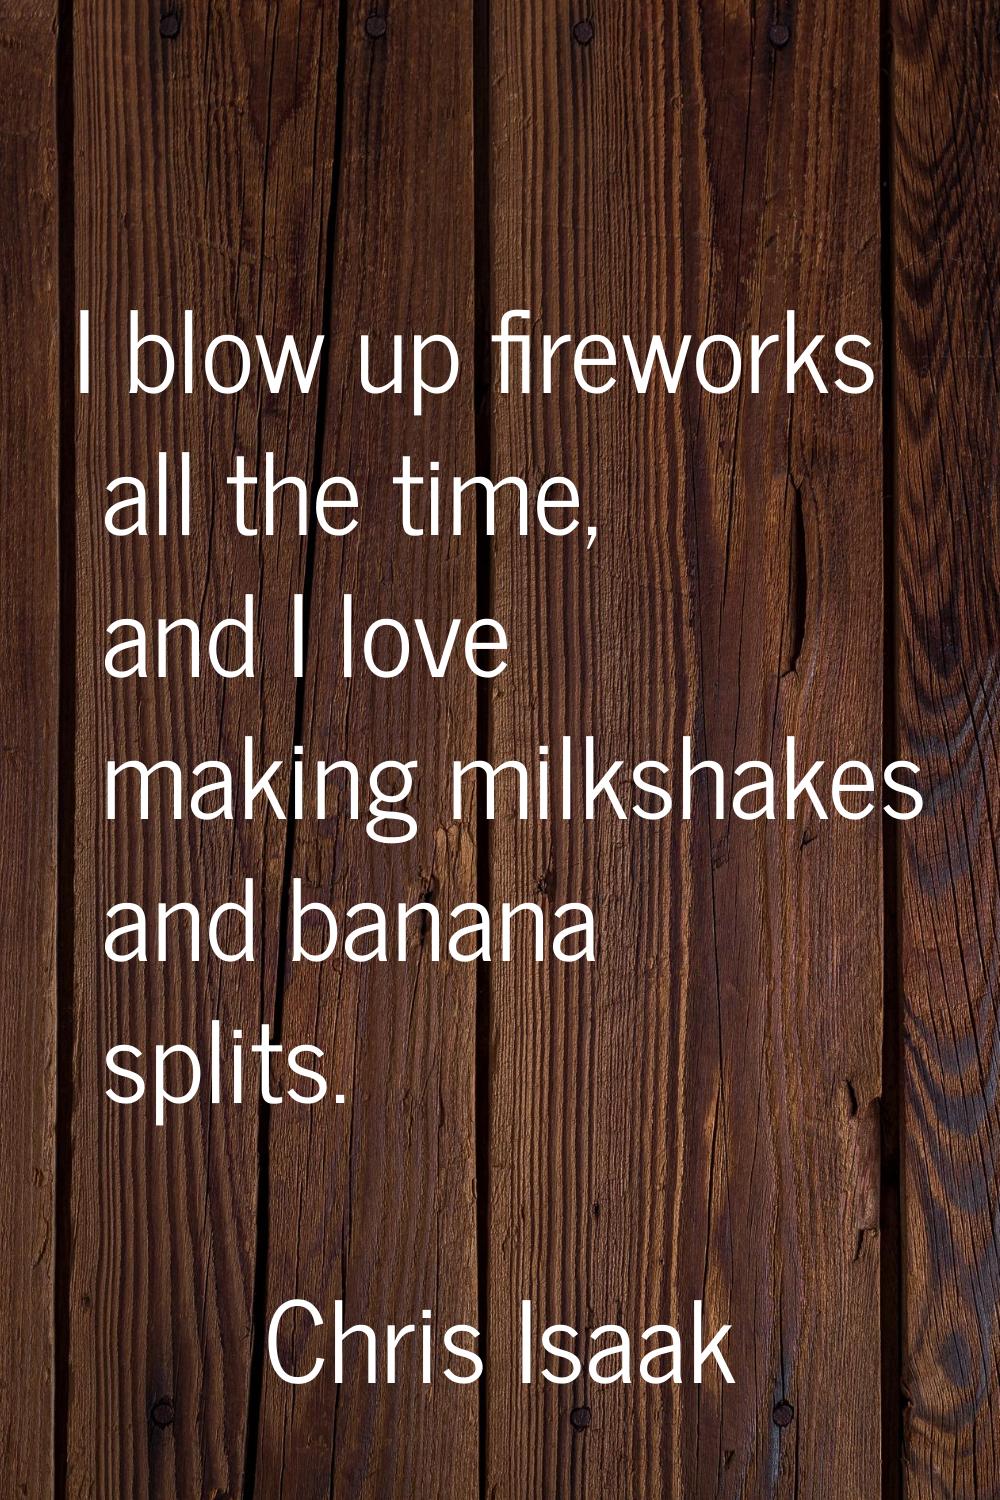 I blow up fireworks all the time, and I love making milkshakes and banana splits.